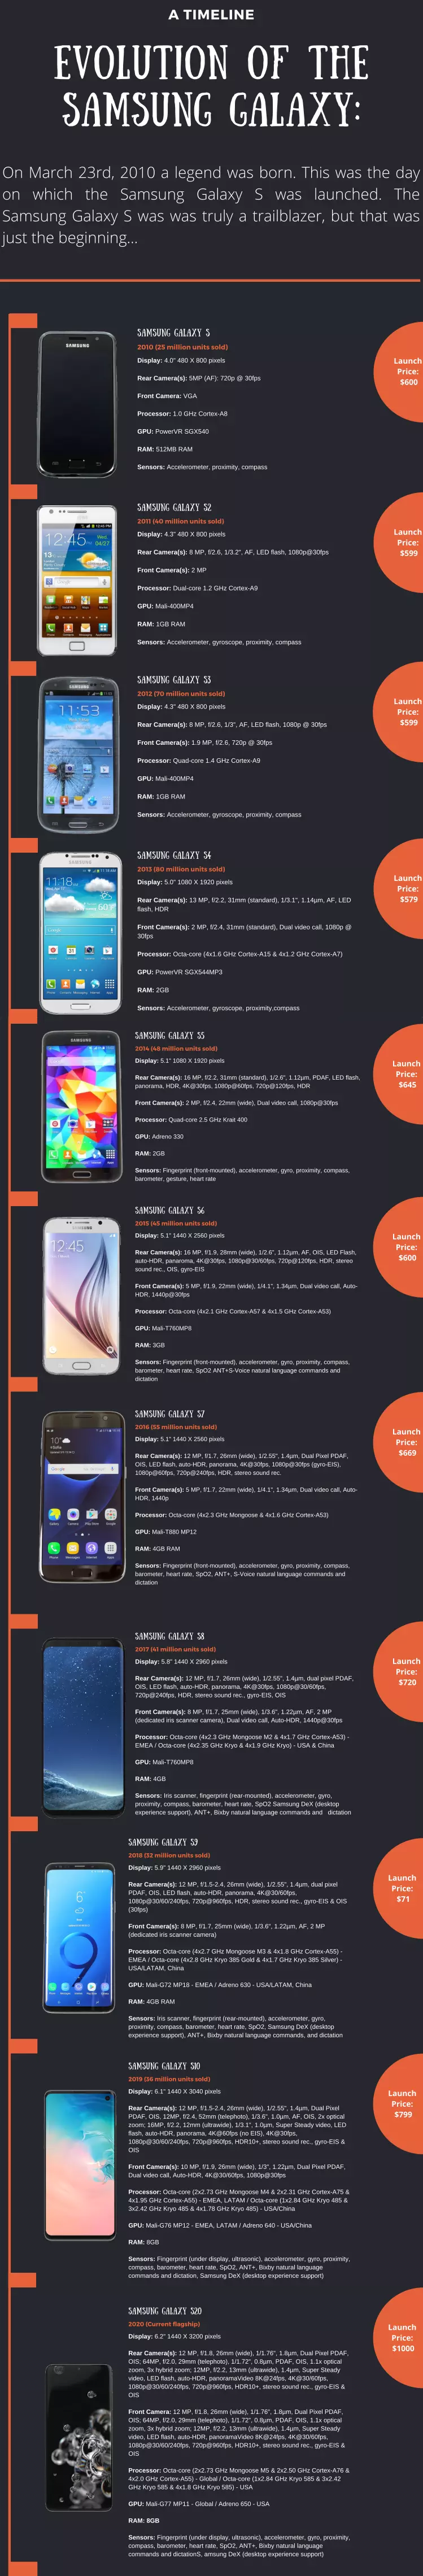 Samsung galaxy mobile features and launch price | Evolution of Samsung Galaxy Timeline